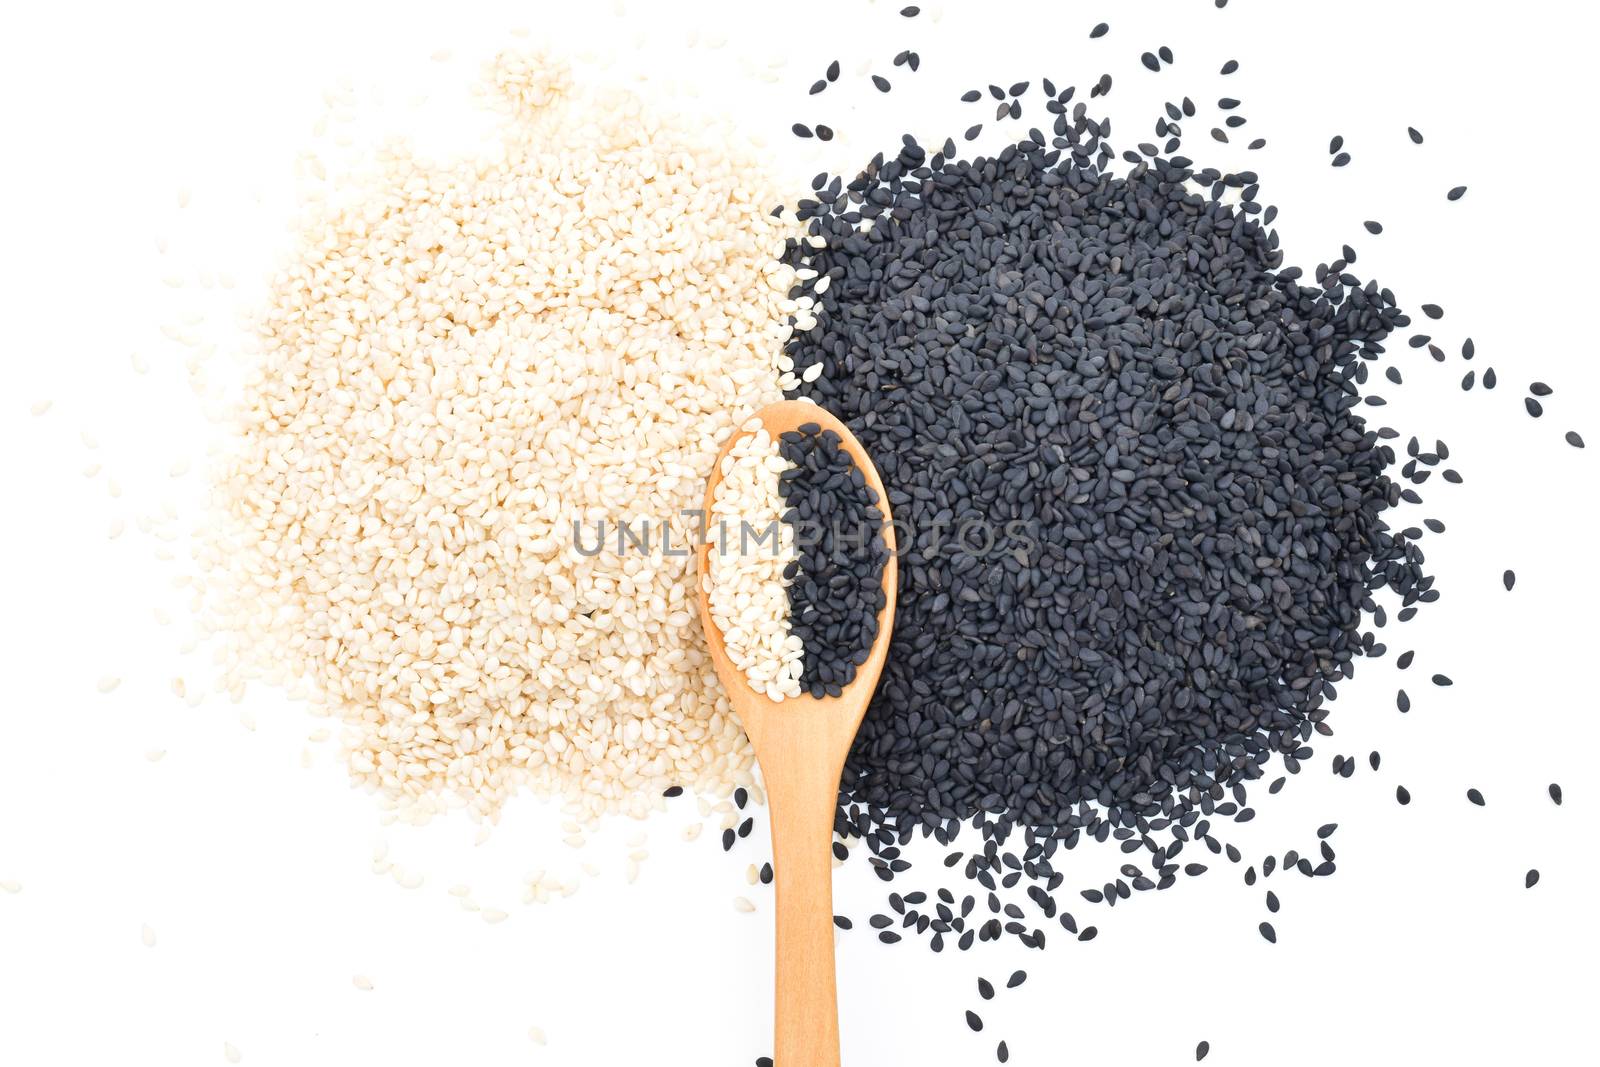 White and Black sesame seeds in wooden scoop on white background by sompongtom